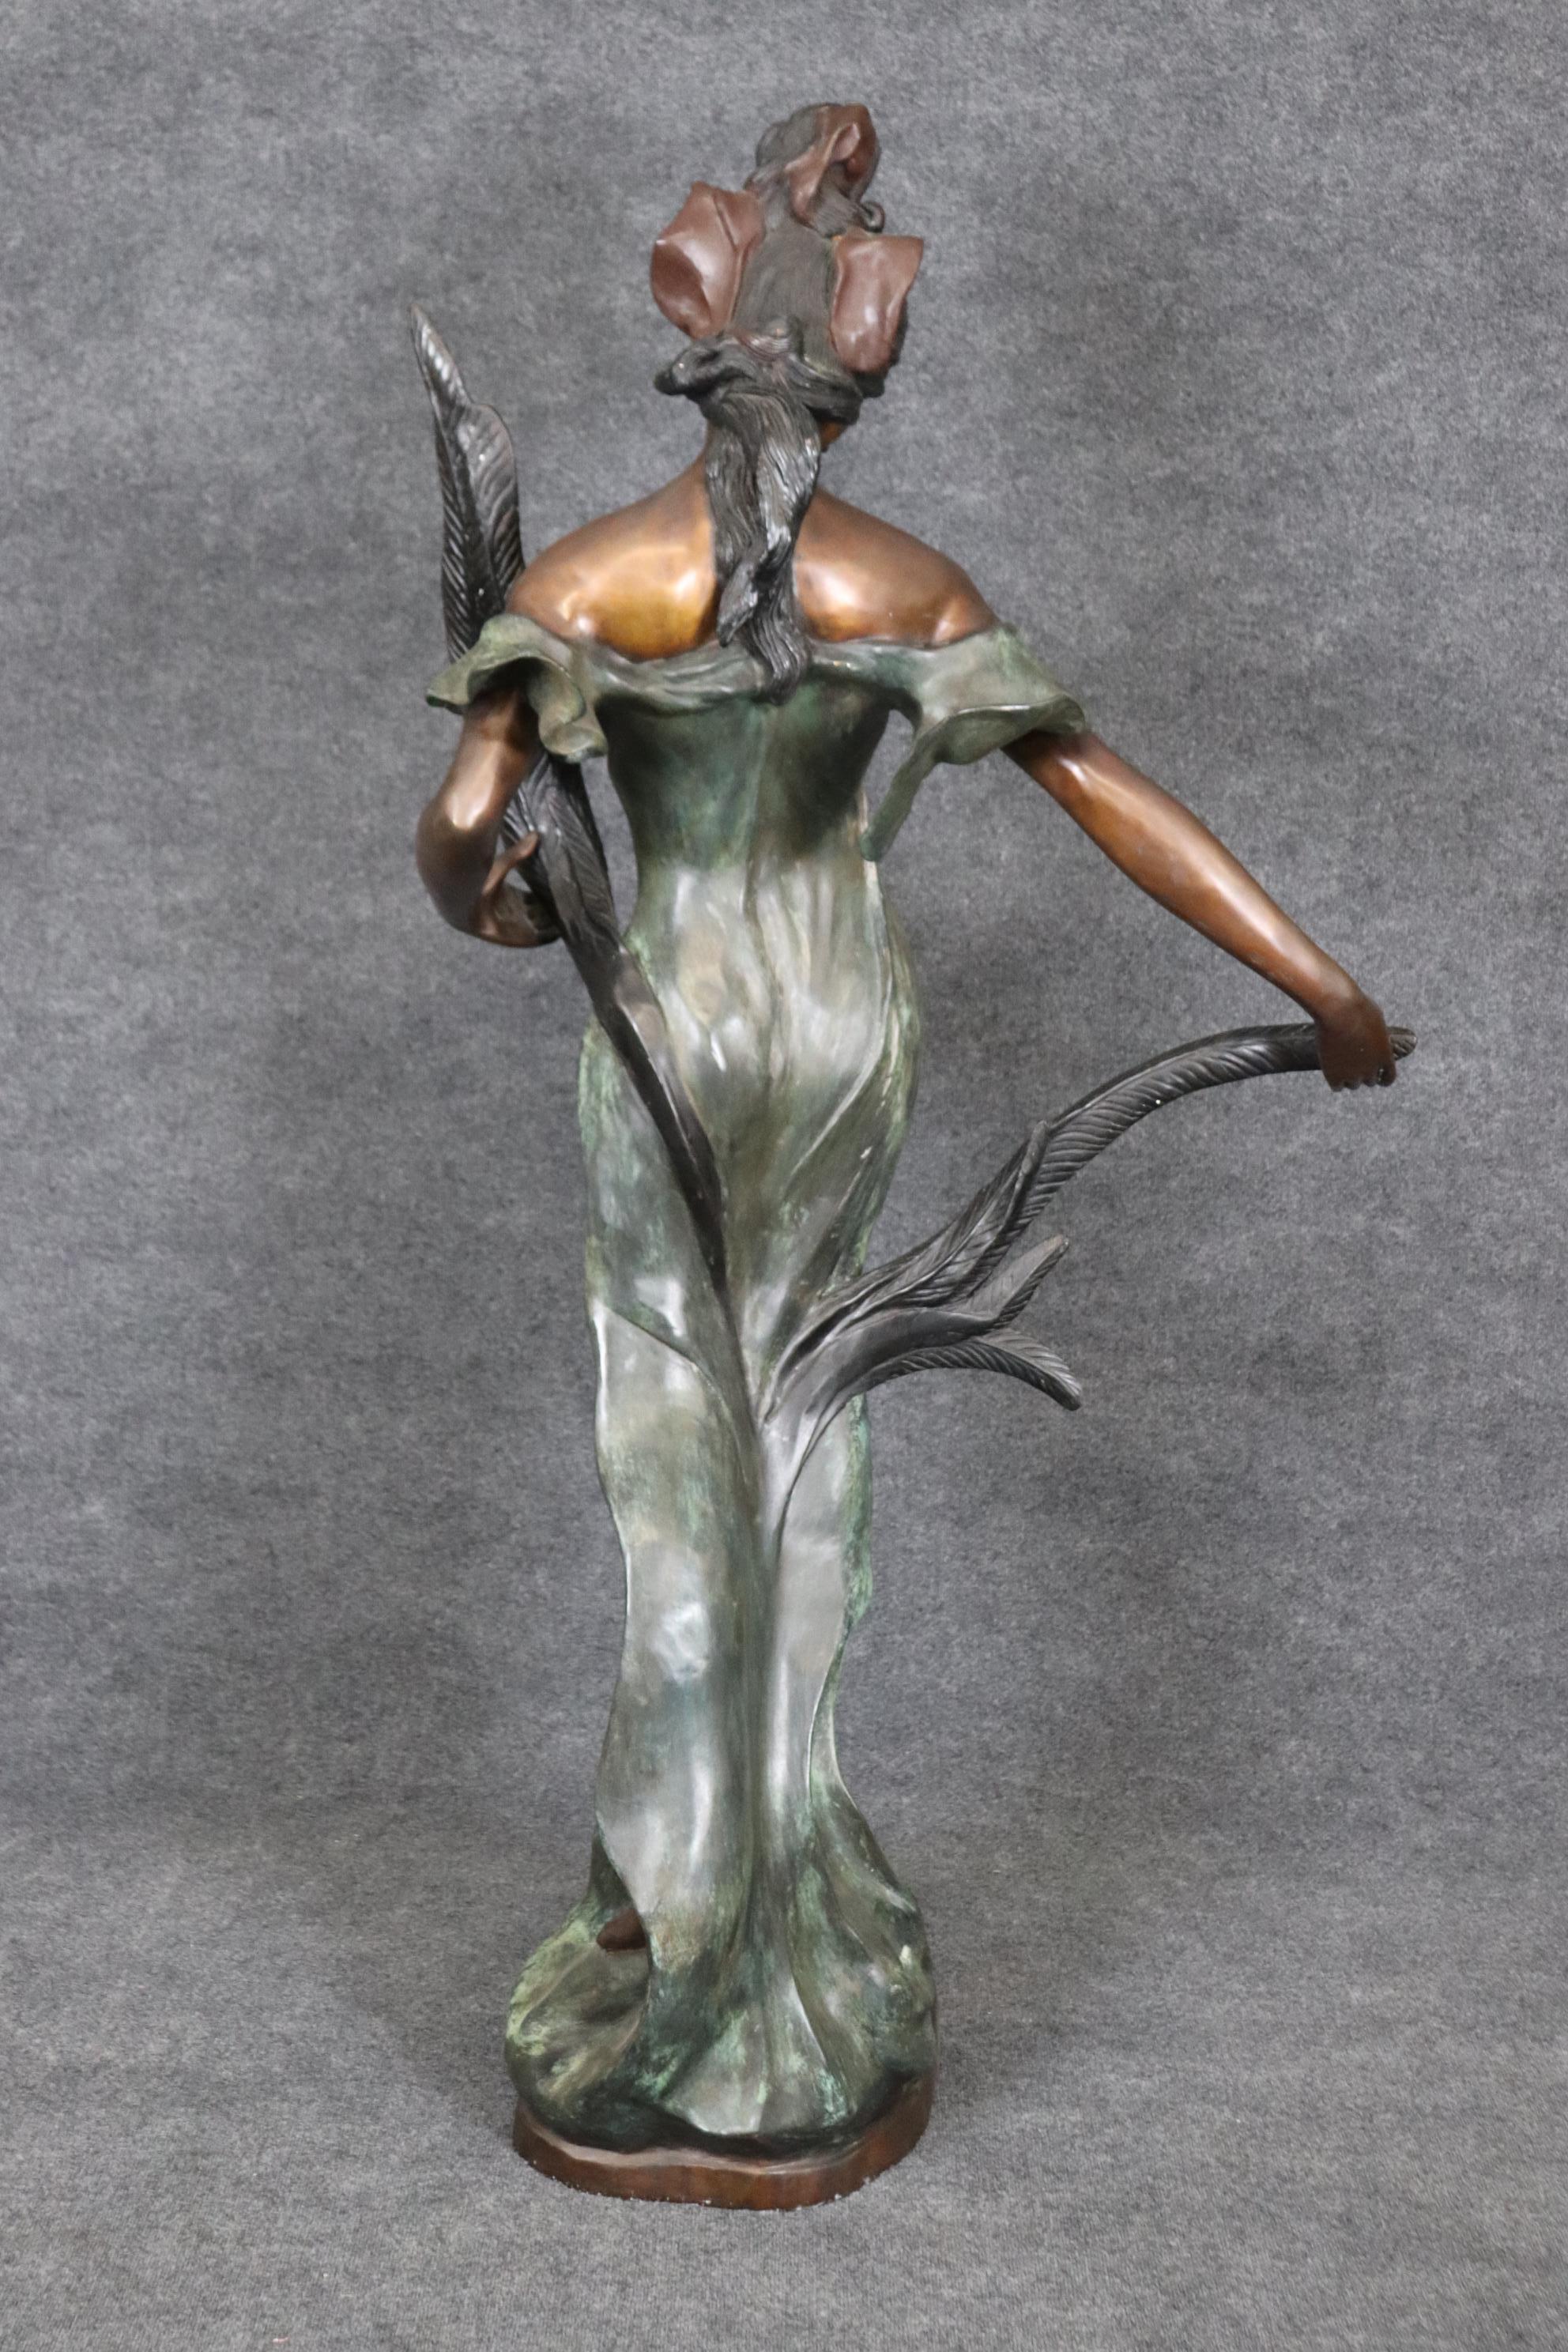 Dimensions- H: 75in W: 37in D: 20in

This Italian signed Eduardo Rossi (1867-1926) Art Nouveau life size bronze sculpture of a woman is an exceptional sculpture and was made with quality in mind!  If you look at the photos provided, you can see it